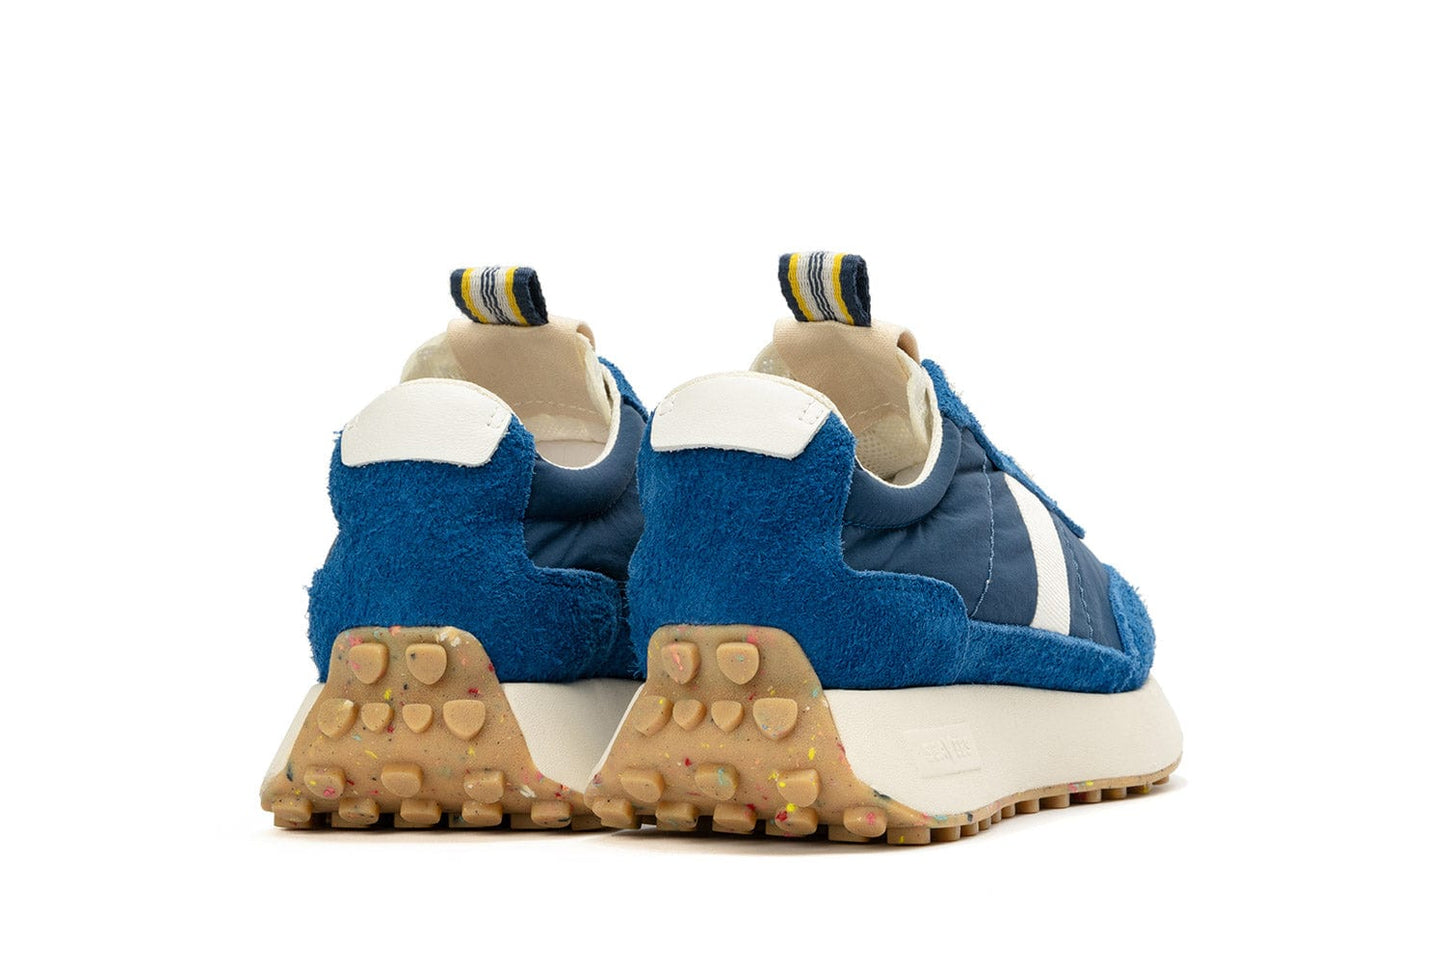 Rear angled view of the Acorn Trainer in the color Varsity Blue, showcasing the blue, white, and yellow pull tab and recycled sole.